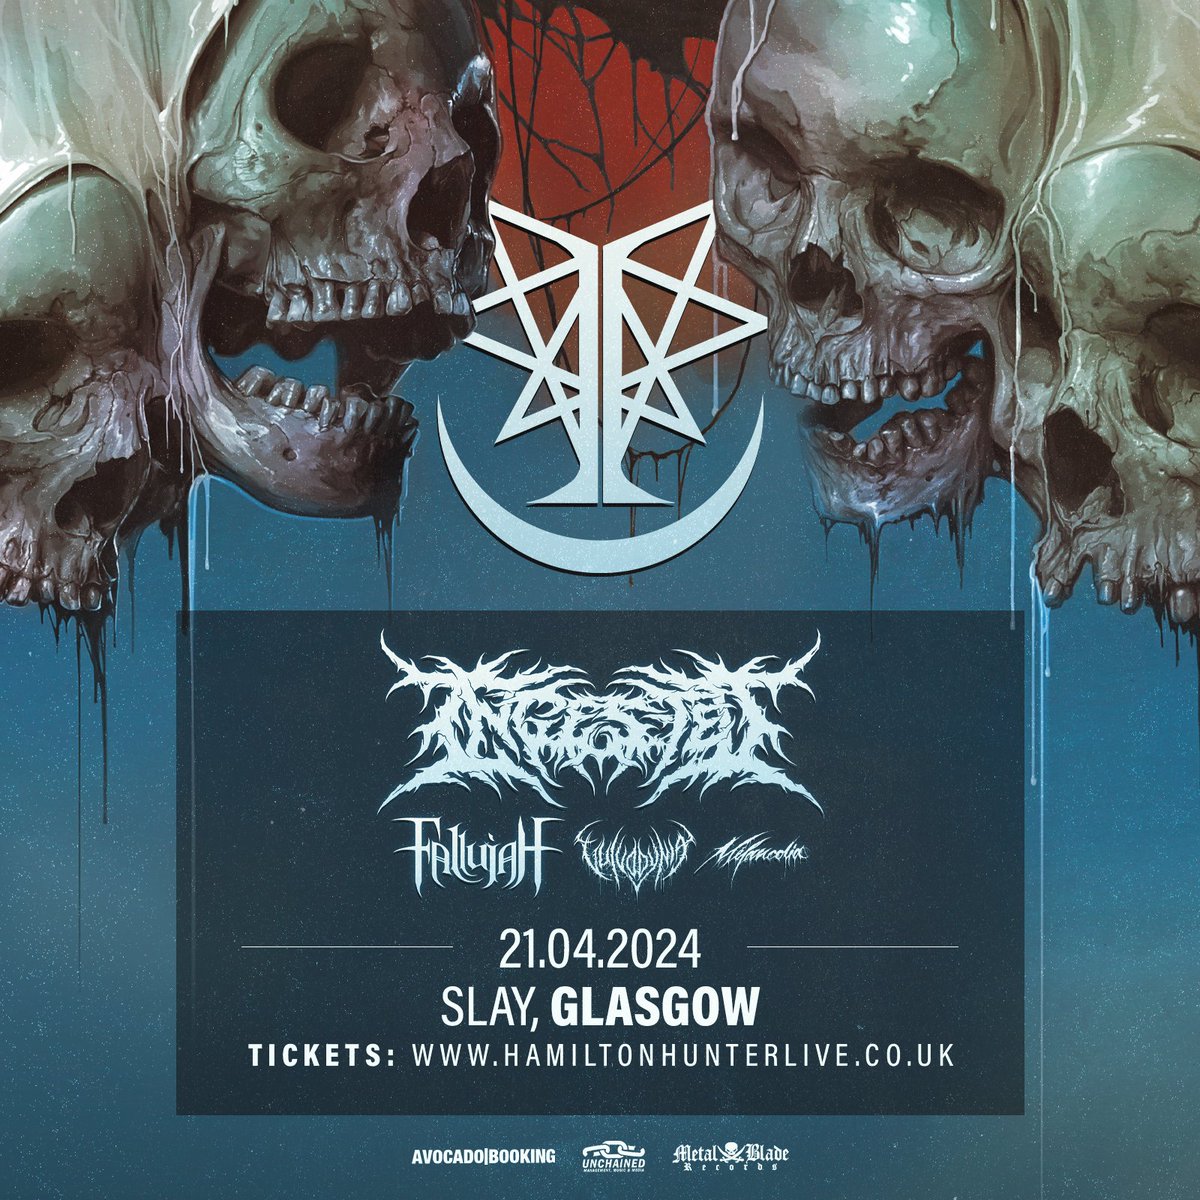 🚨𝗧𝗛𝗜𝗦 𝗪𝗘𝗘𝗞𝗘𝗡𝗗 -> @INGESTED return to Glasgow! The Manchester death metal band headline with an album's worth of new material and a stacked support bill of @fallujahbayarea, @Vulvodyniaslam, @melancolia_exe @scottishmetal @ticketsscotland @whatsonglasgow